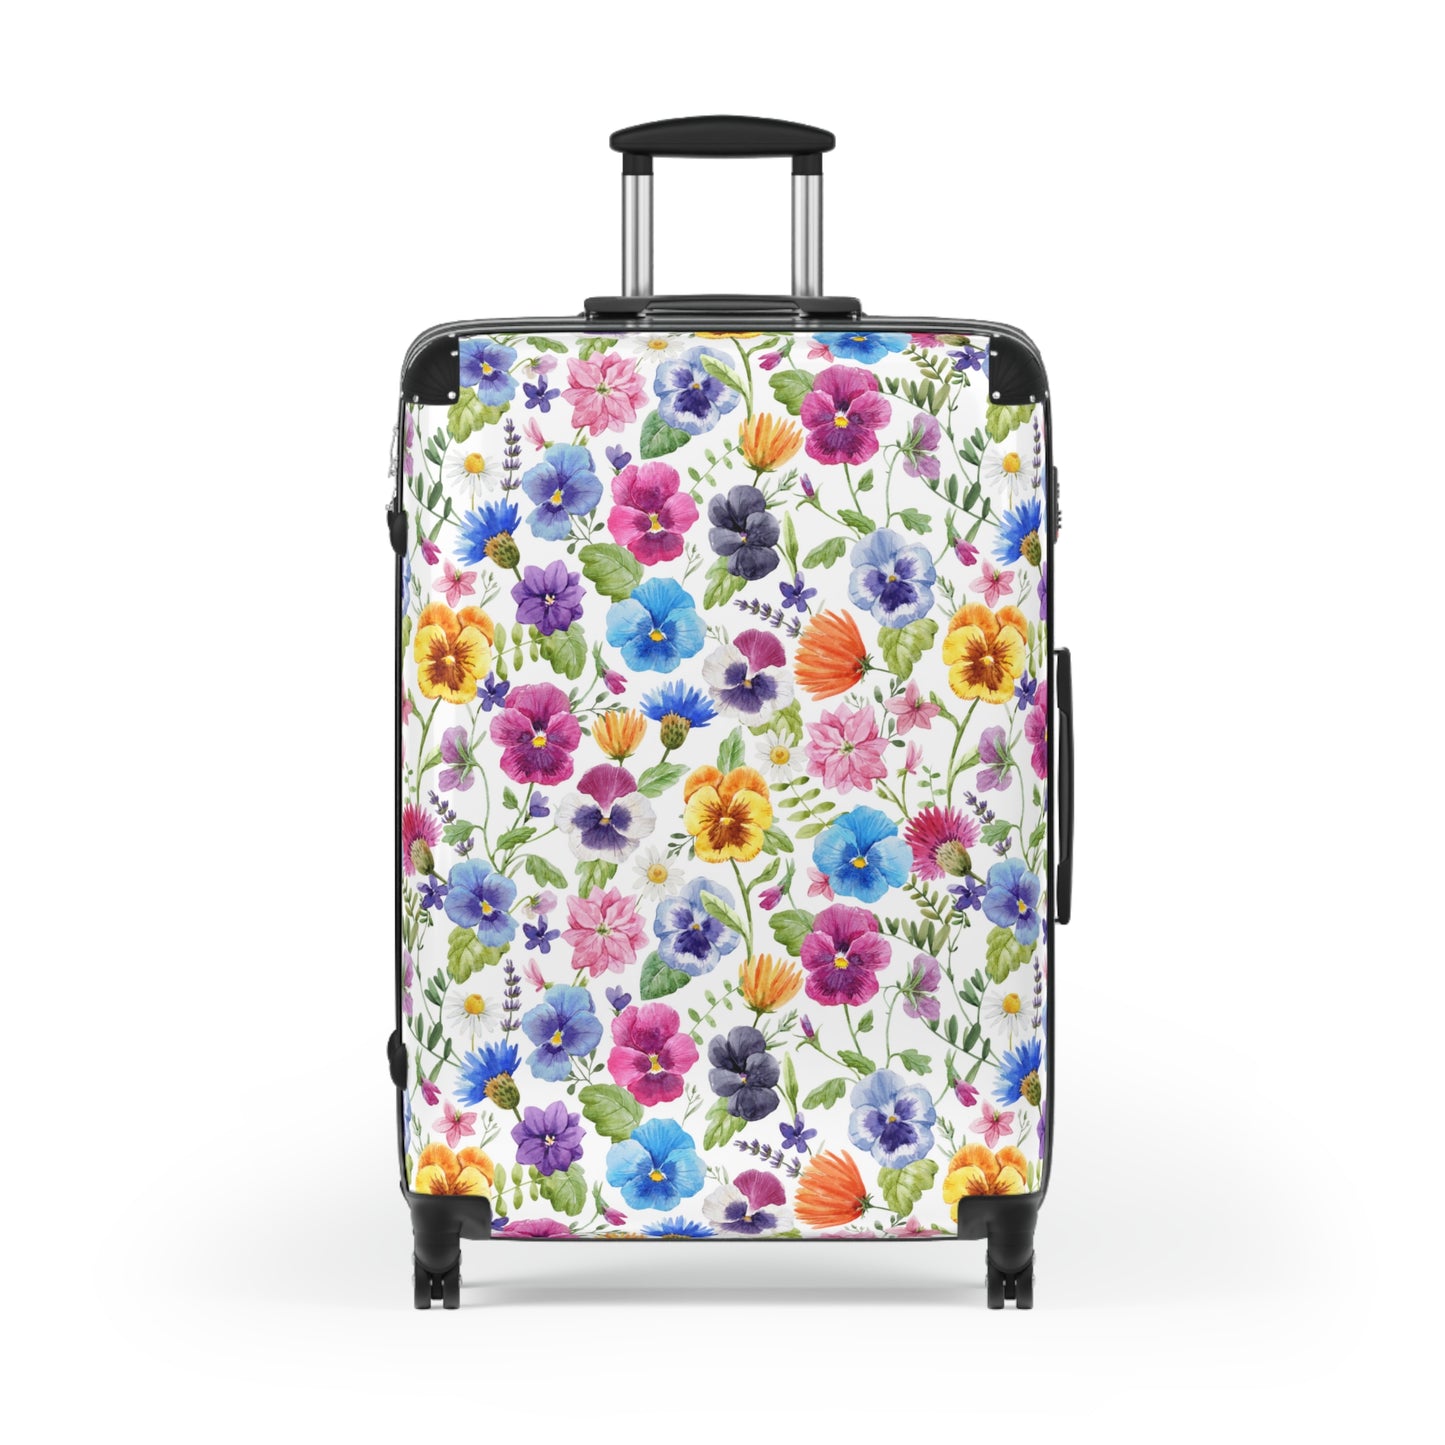 floral suitcase with blue, orange, purple, pink and green pansy print